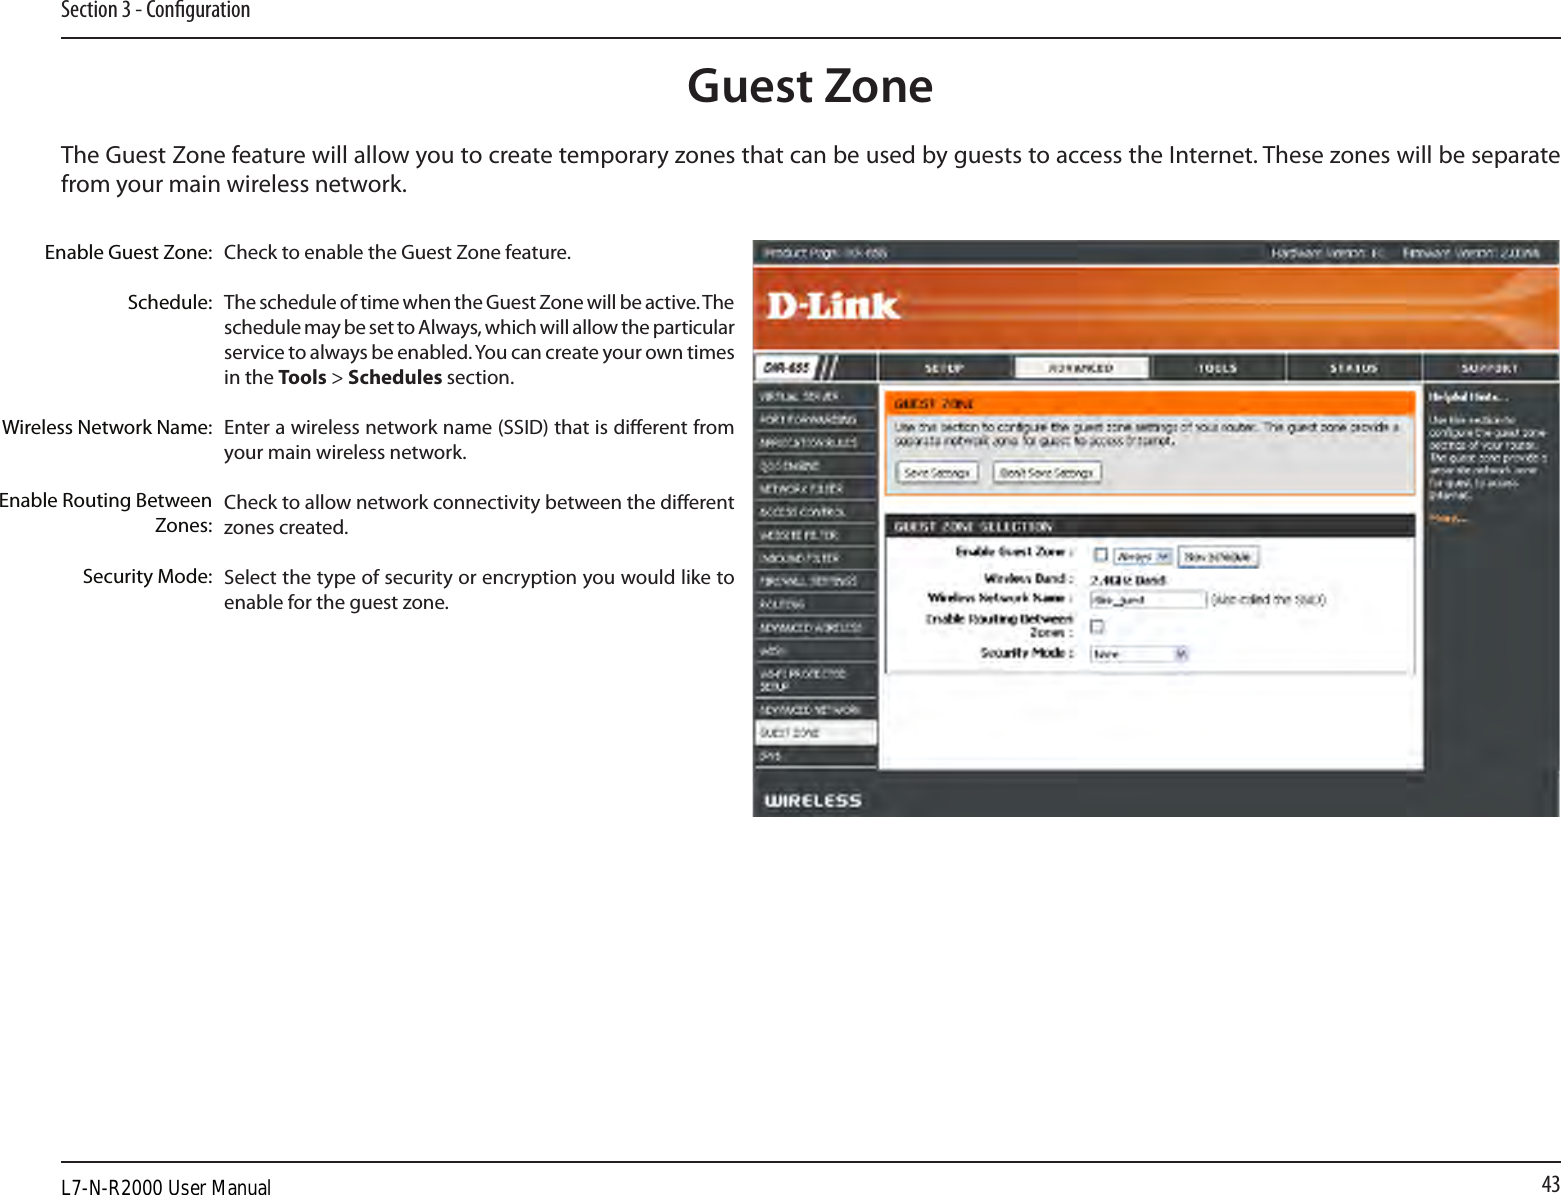 43Section 3 - CongurationGuest ZoneCheck to enable the Guest Zone feature. The schedule of time when the Guest Zone will be active. The schedule may be set to Always, which will allow the particular service to always be enabled. You can create your own times in the Tools &gt; Schedules section.Enter a wireless network name (SSID) that is dierent from your main wireless network.Check to allow network connectivity between the dierent zones created. Select the type of security or encryption you would like to enable for the guest zone.  Enable Guest Zone:Schedule:Wireless Network Name:Enable Routing Between Zones:Security Mode:The Guest Zone feature will allow you to create temporary zones that can be used by guests to access the Internet. These zones will be separate from your main wireless network. L7-N-R2000 User Manual